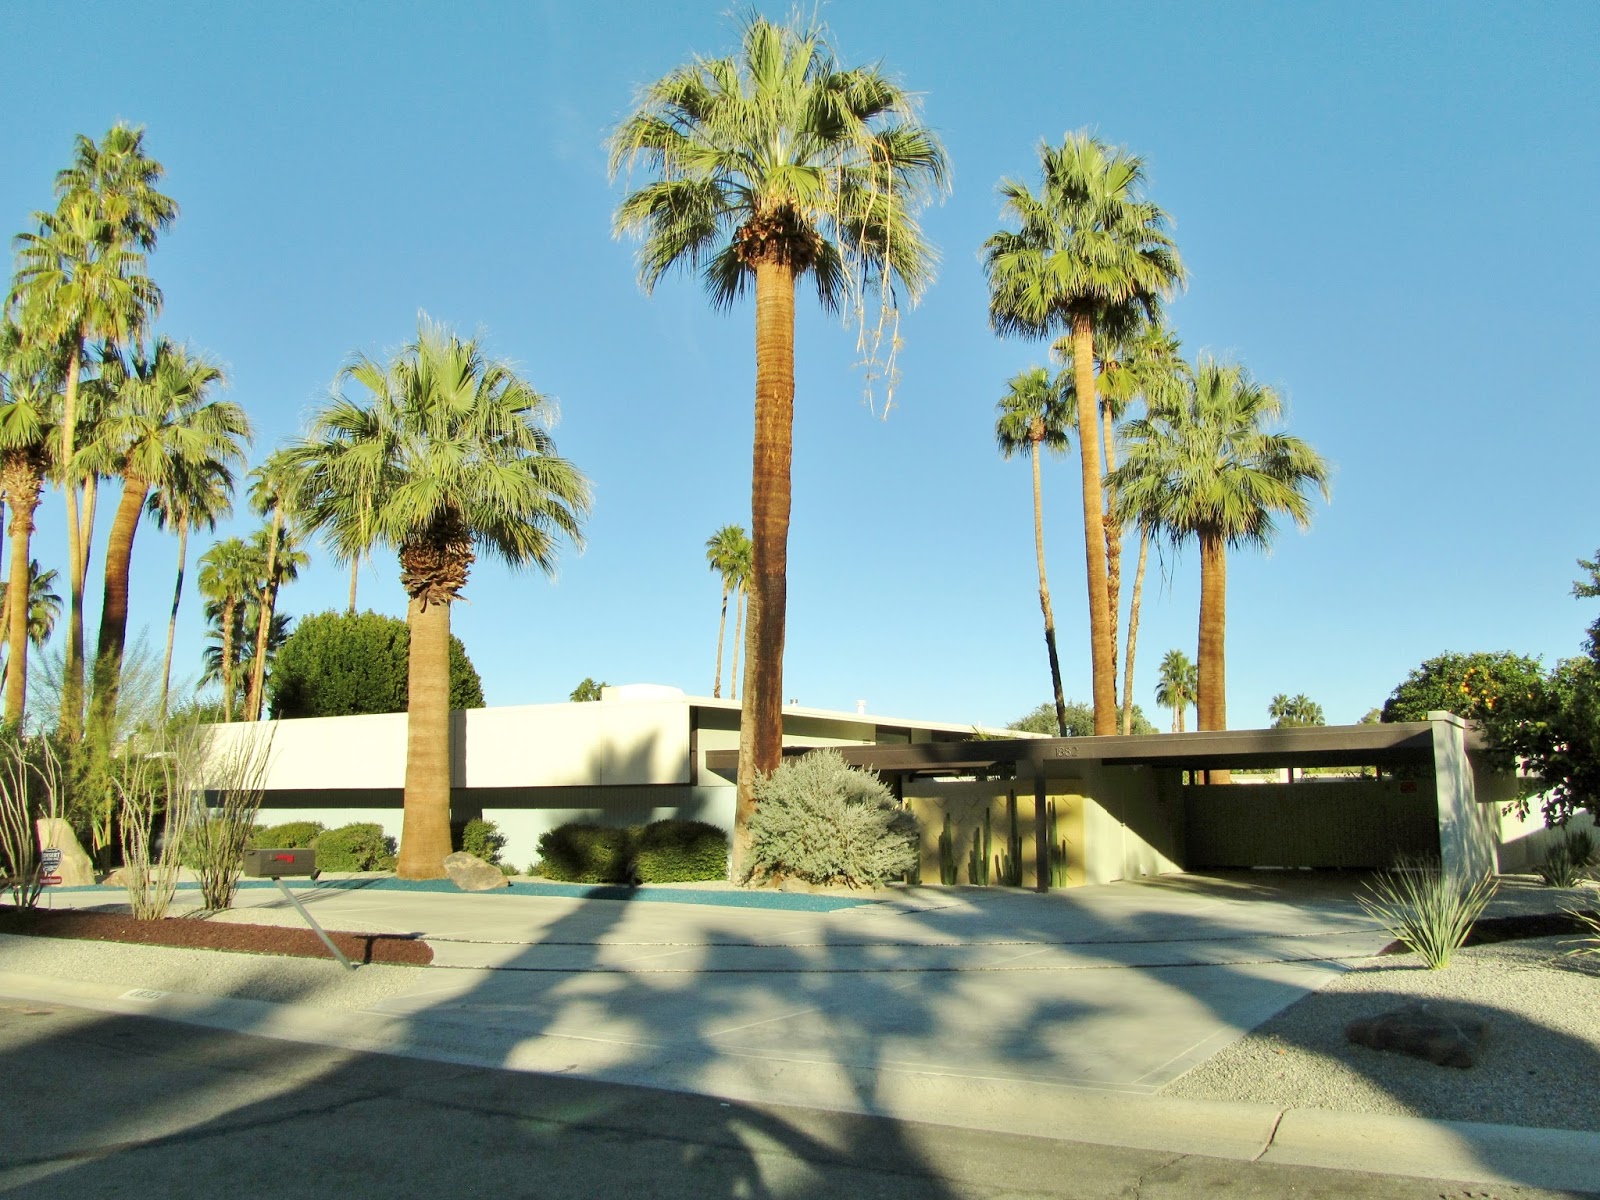 A modern single-story building with a flat roof surrounded by tall palm trees under a clear blue sky. The landscaped front yard features gravel, shrubs, and cacti. Shadows from the palm trees are cast on the ground in the foreground.